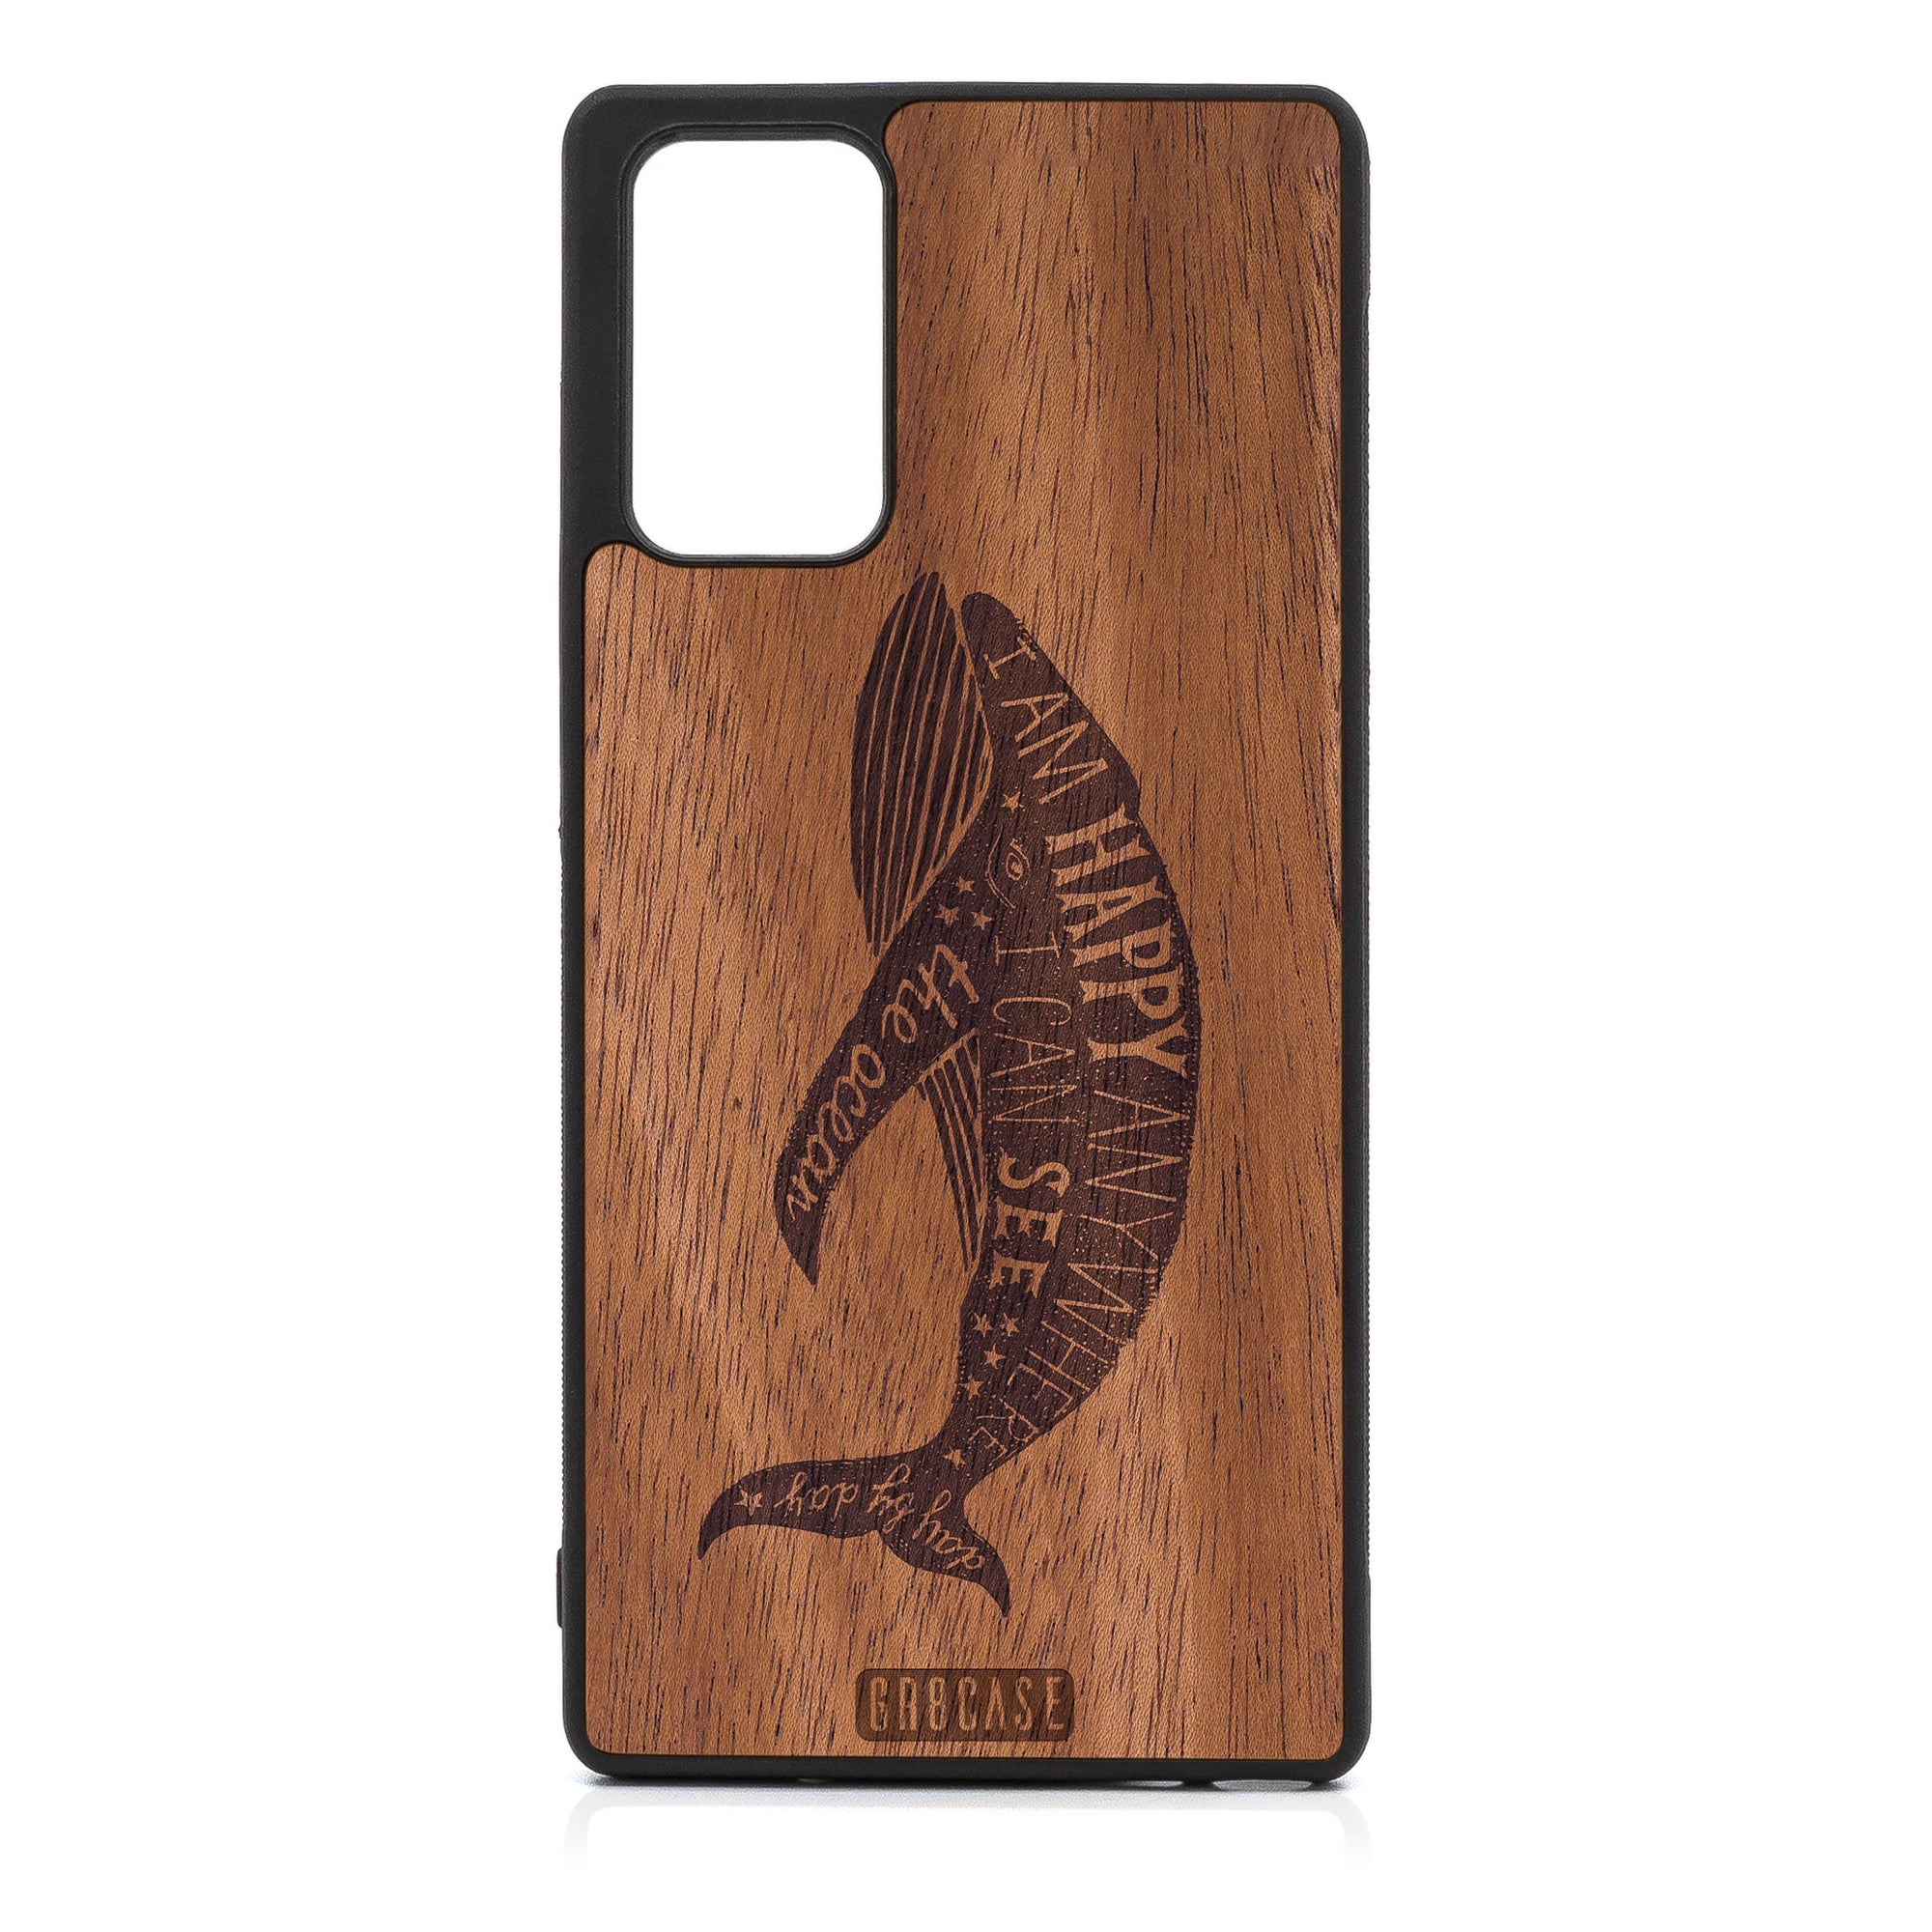 I'm Happy Anywhere I Can See The Ocean (Whale) Design Wood Case For Samsung Galaxy Note 20